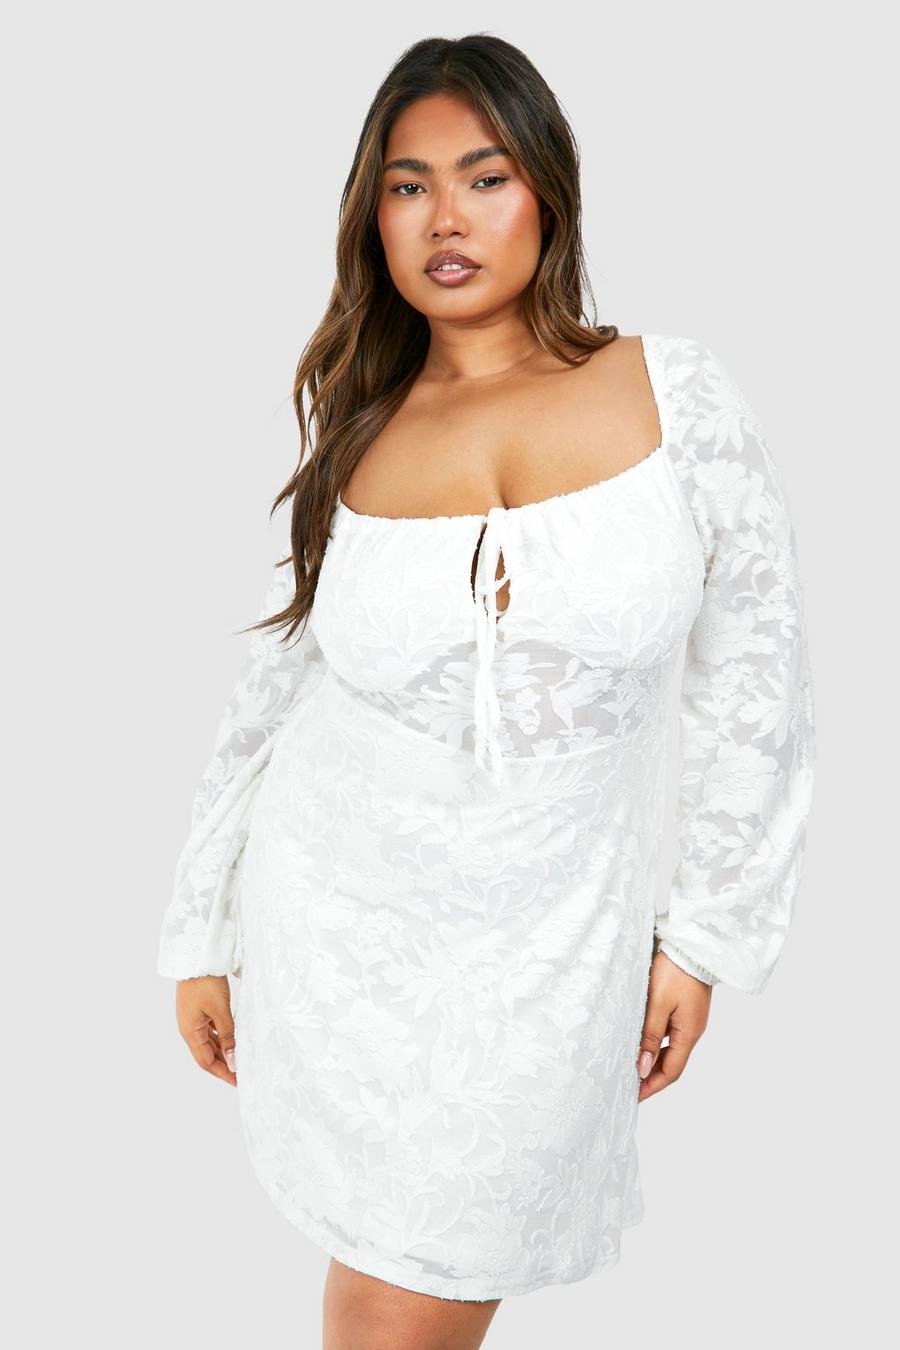 Grande taille - Robe patineuse fleurie texturée, White image number 1